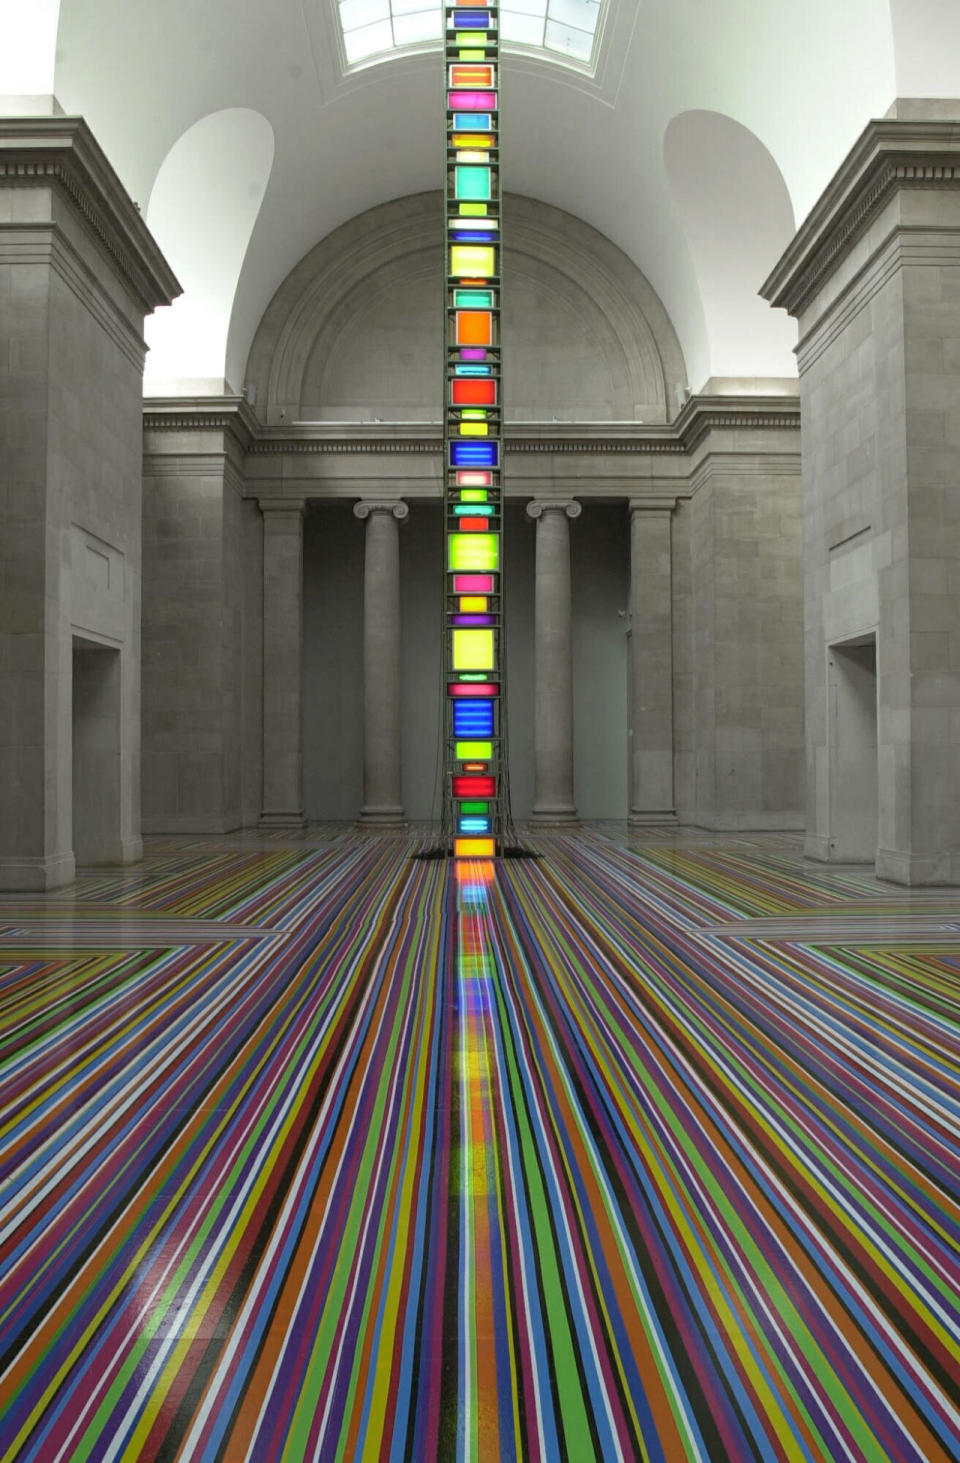 Jim Lambie's Zobop Colored Vinyl Tape Installation at the Tate Britain, 2003